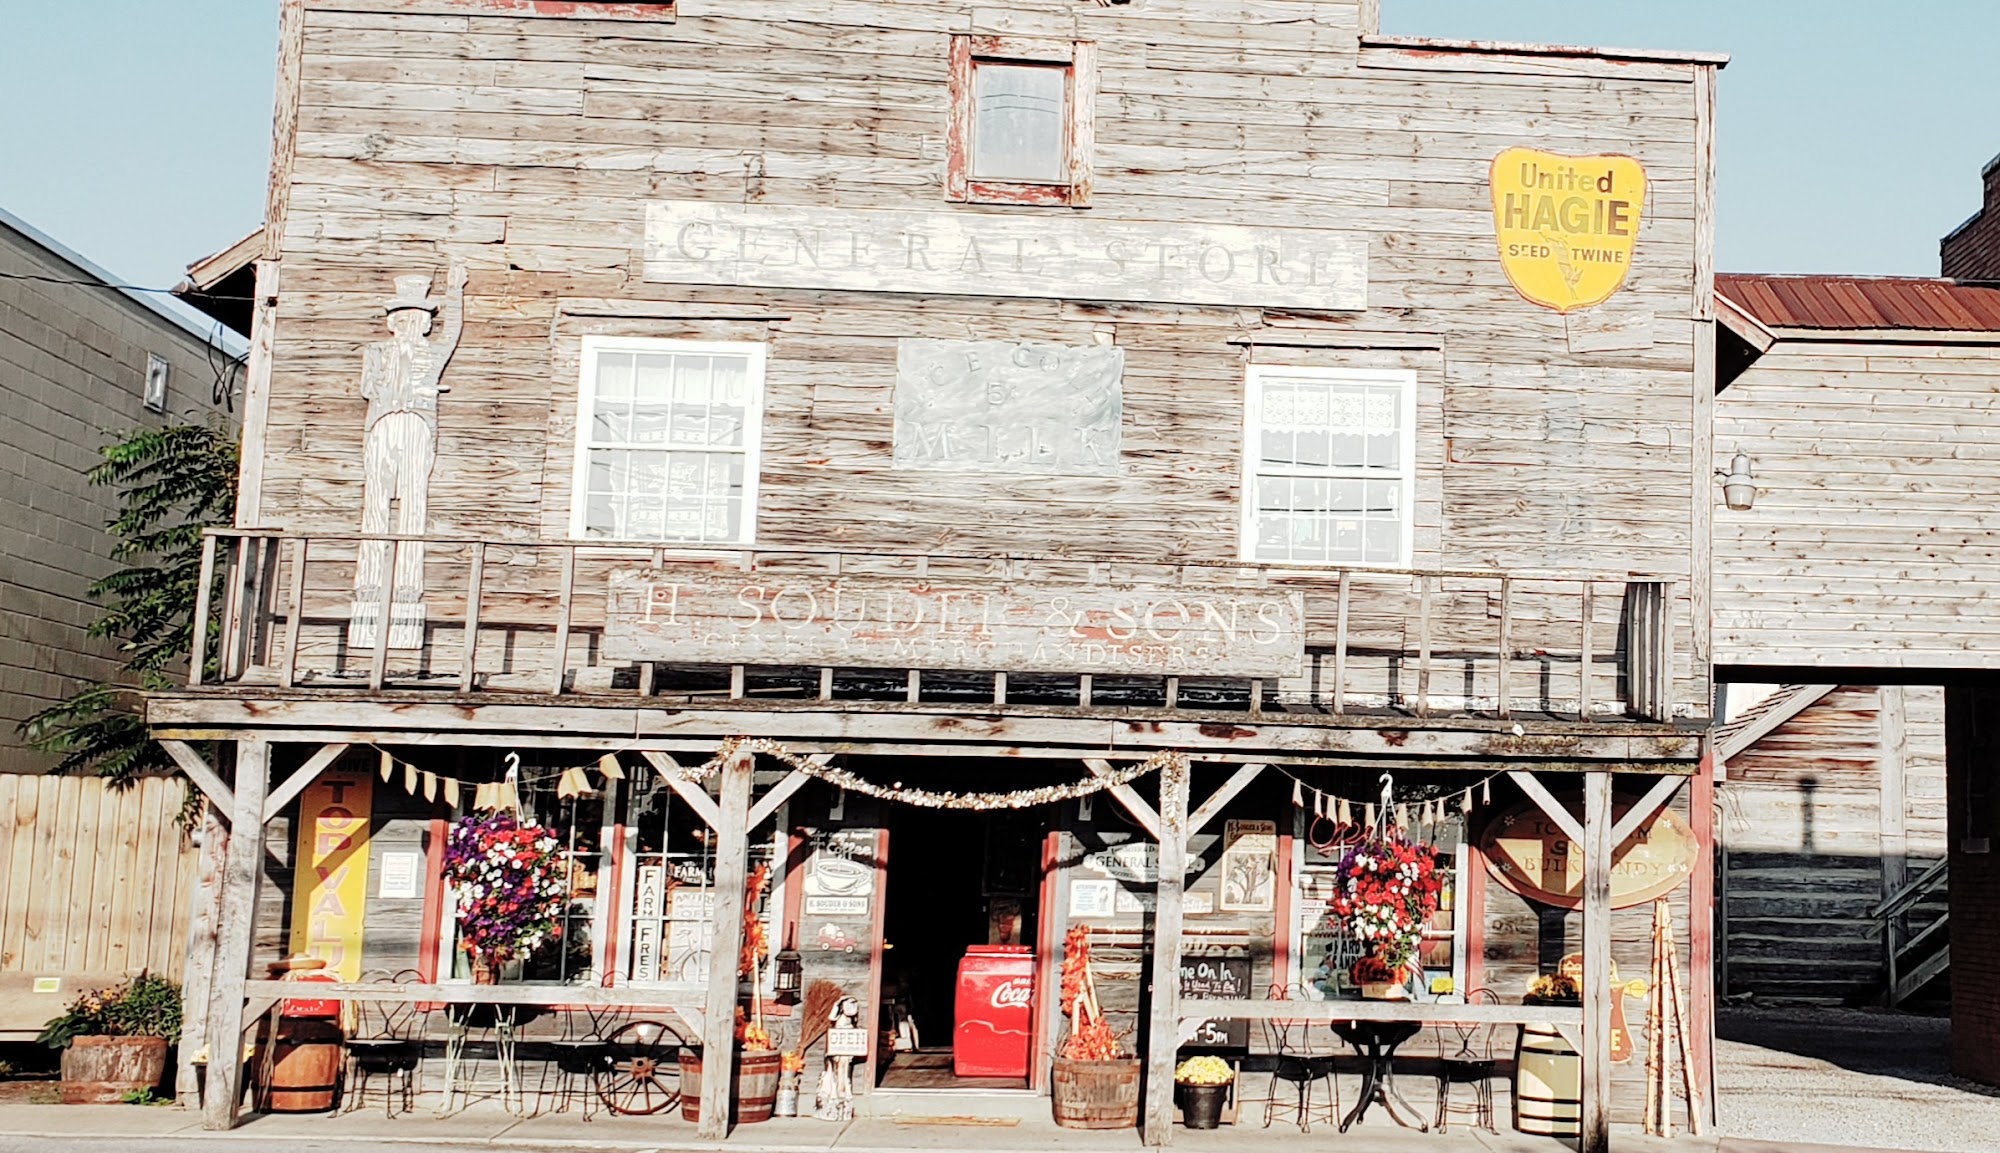 H. Souder & Son's General Store